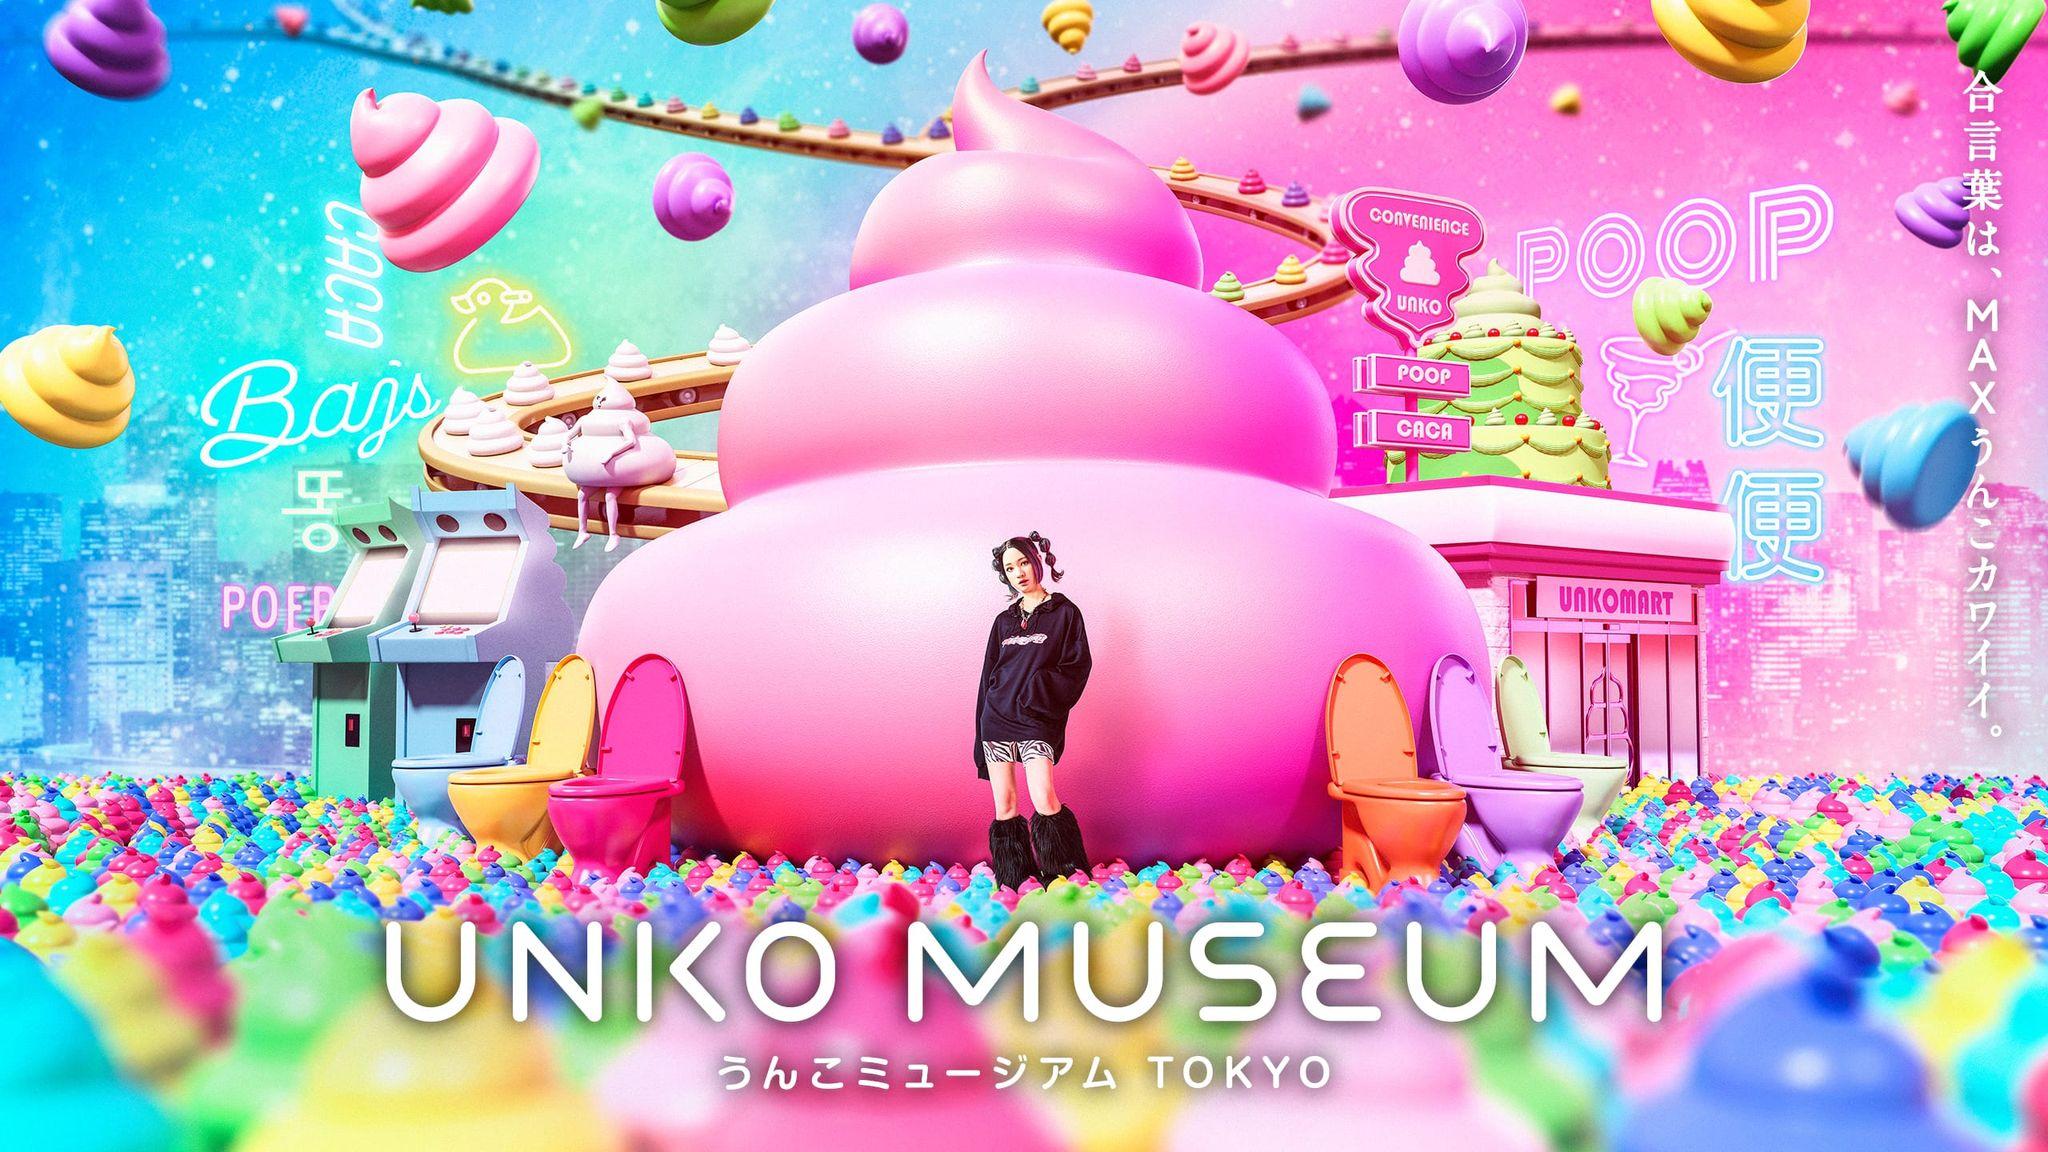 Unko Museum Promotion Poster